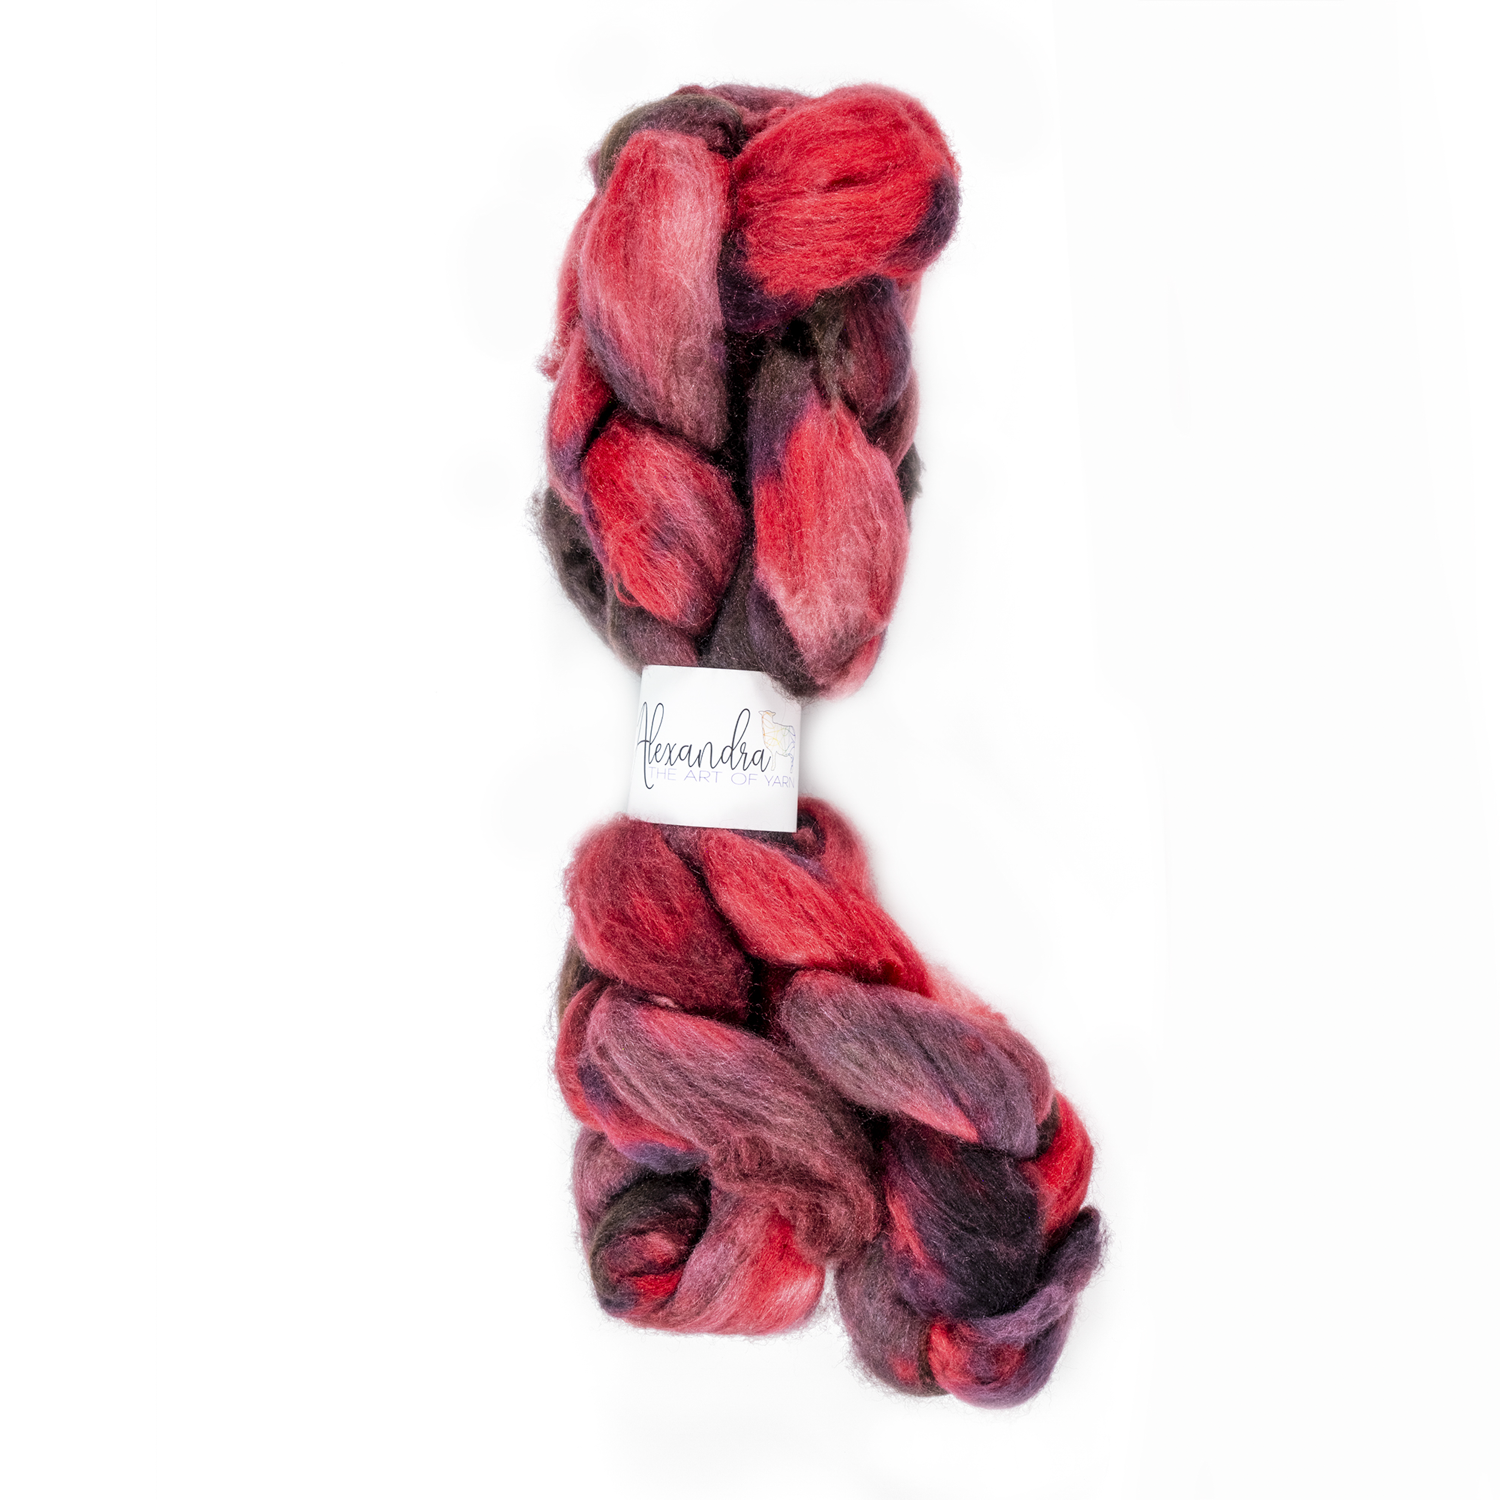 Red and Black Yarn 